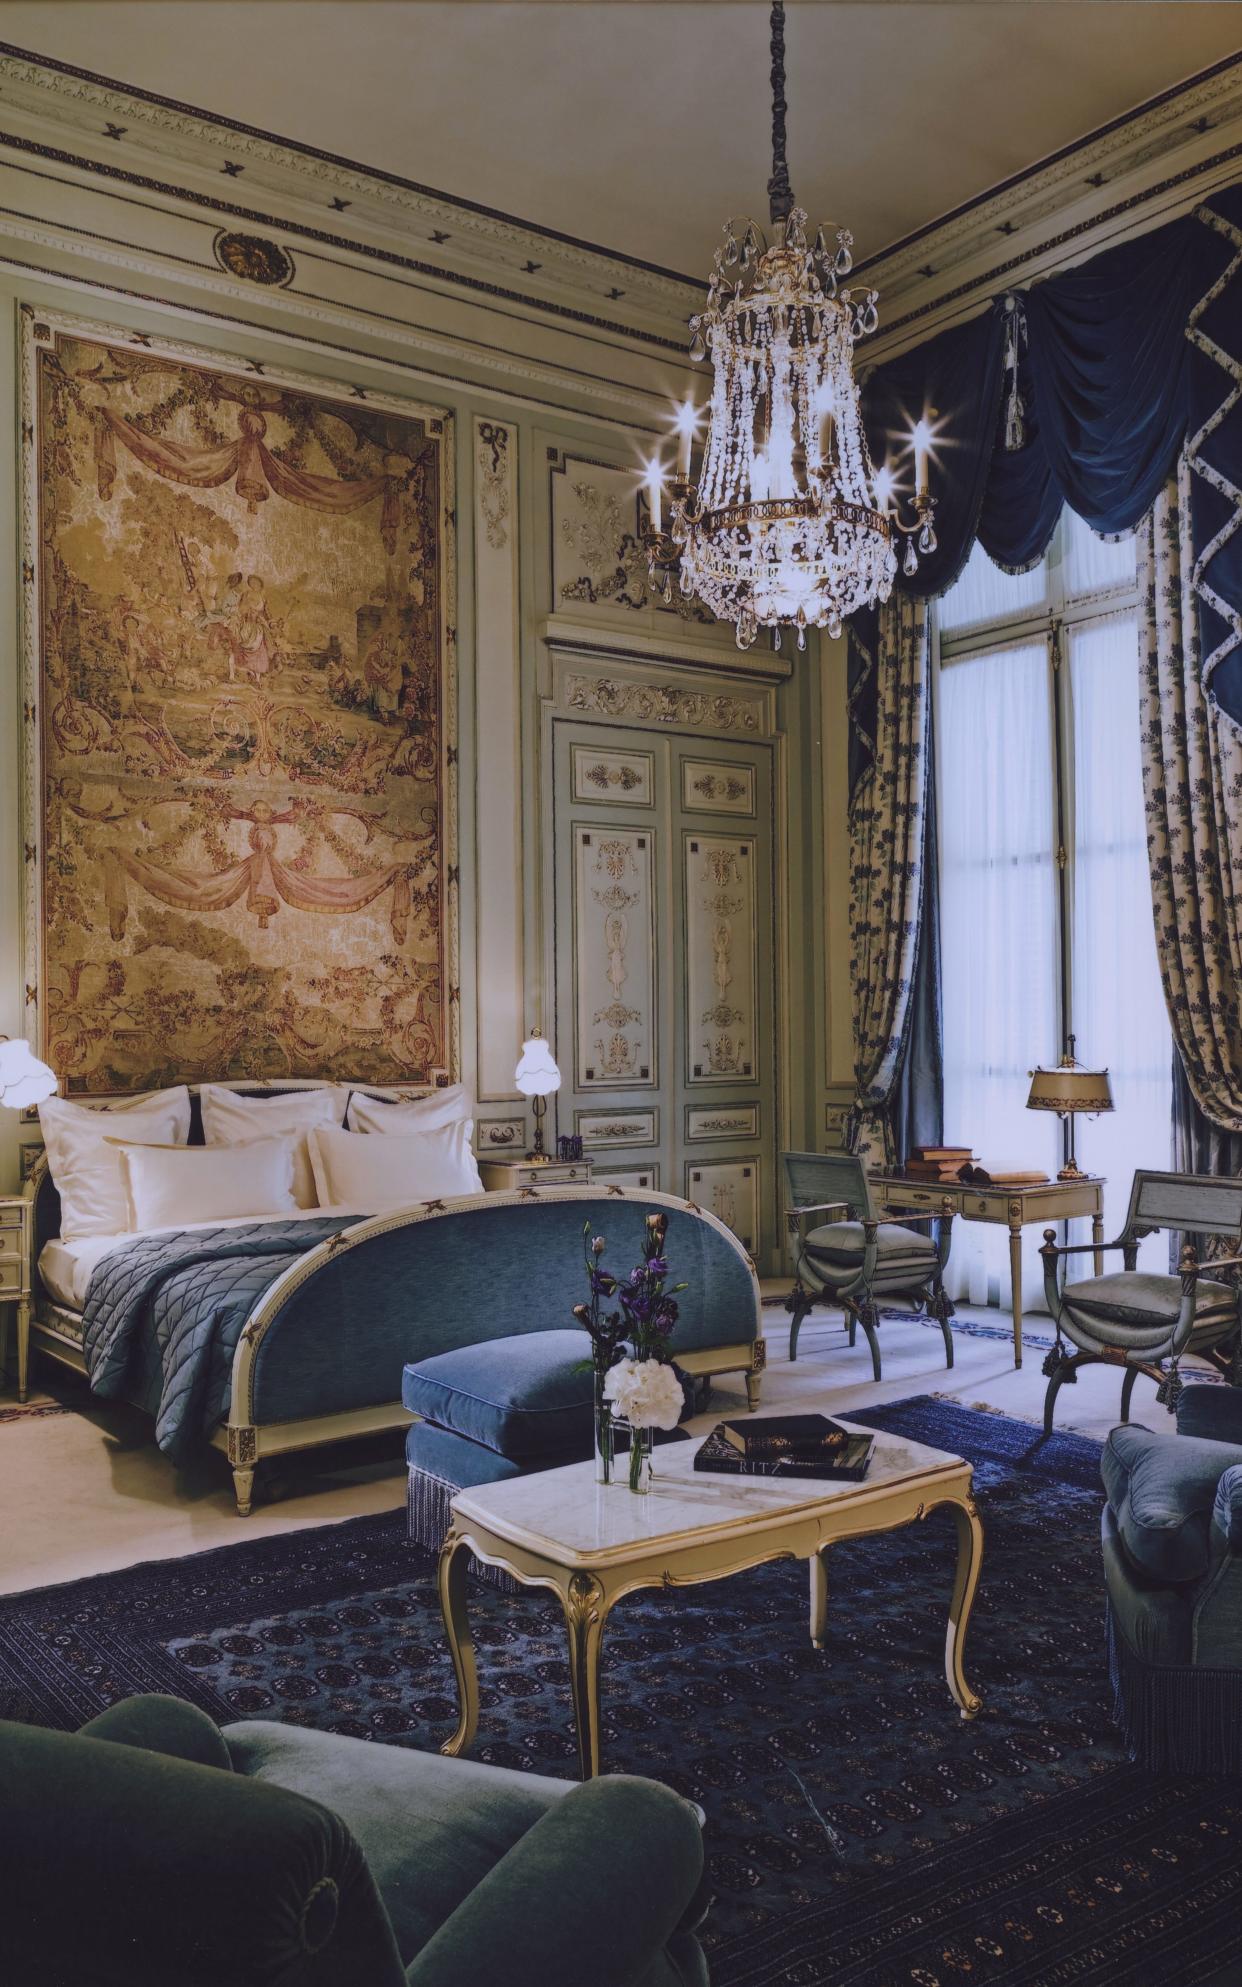 The Windsor Suite at The Ritz Paris in 1980. Furniture from this era of the hotel's history will be available for sale at the forthcoming auction